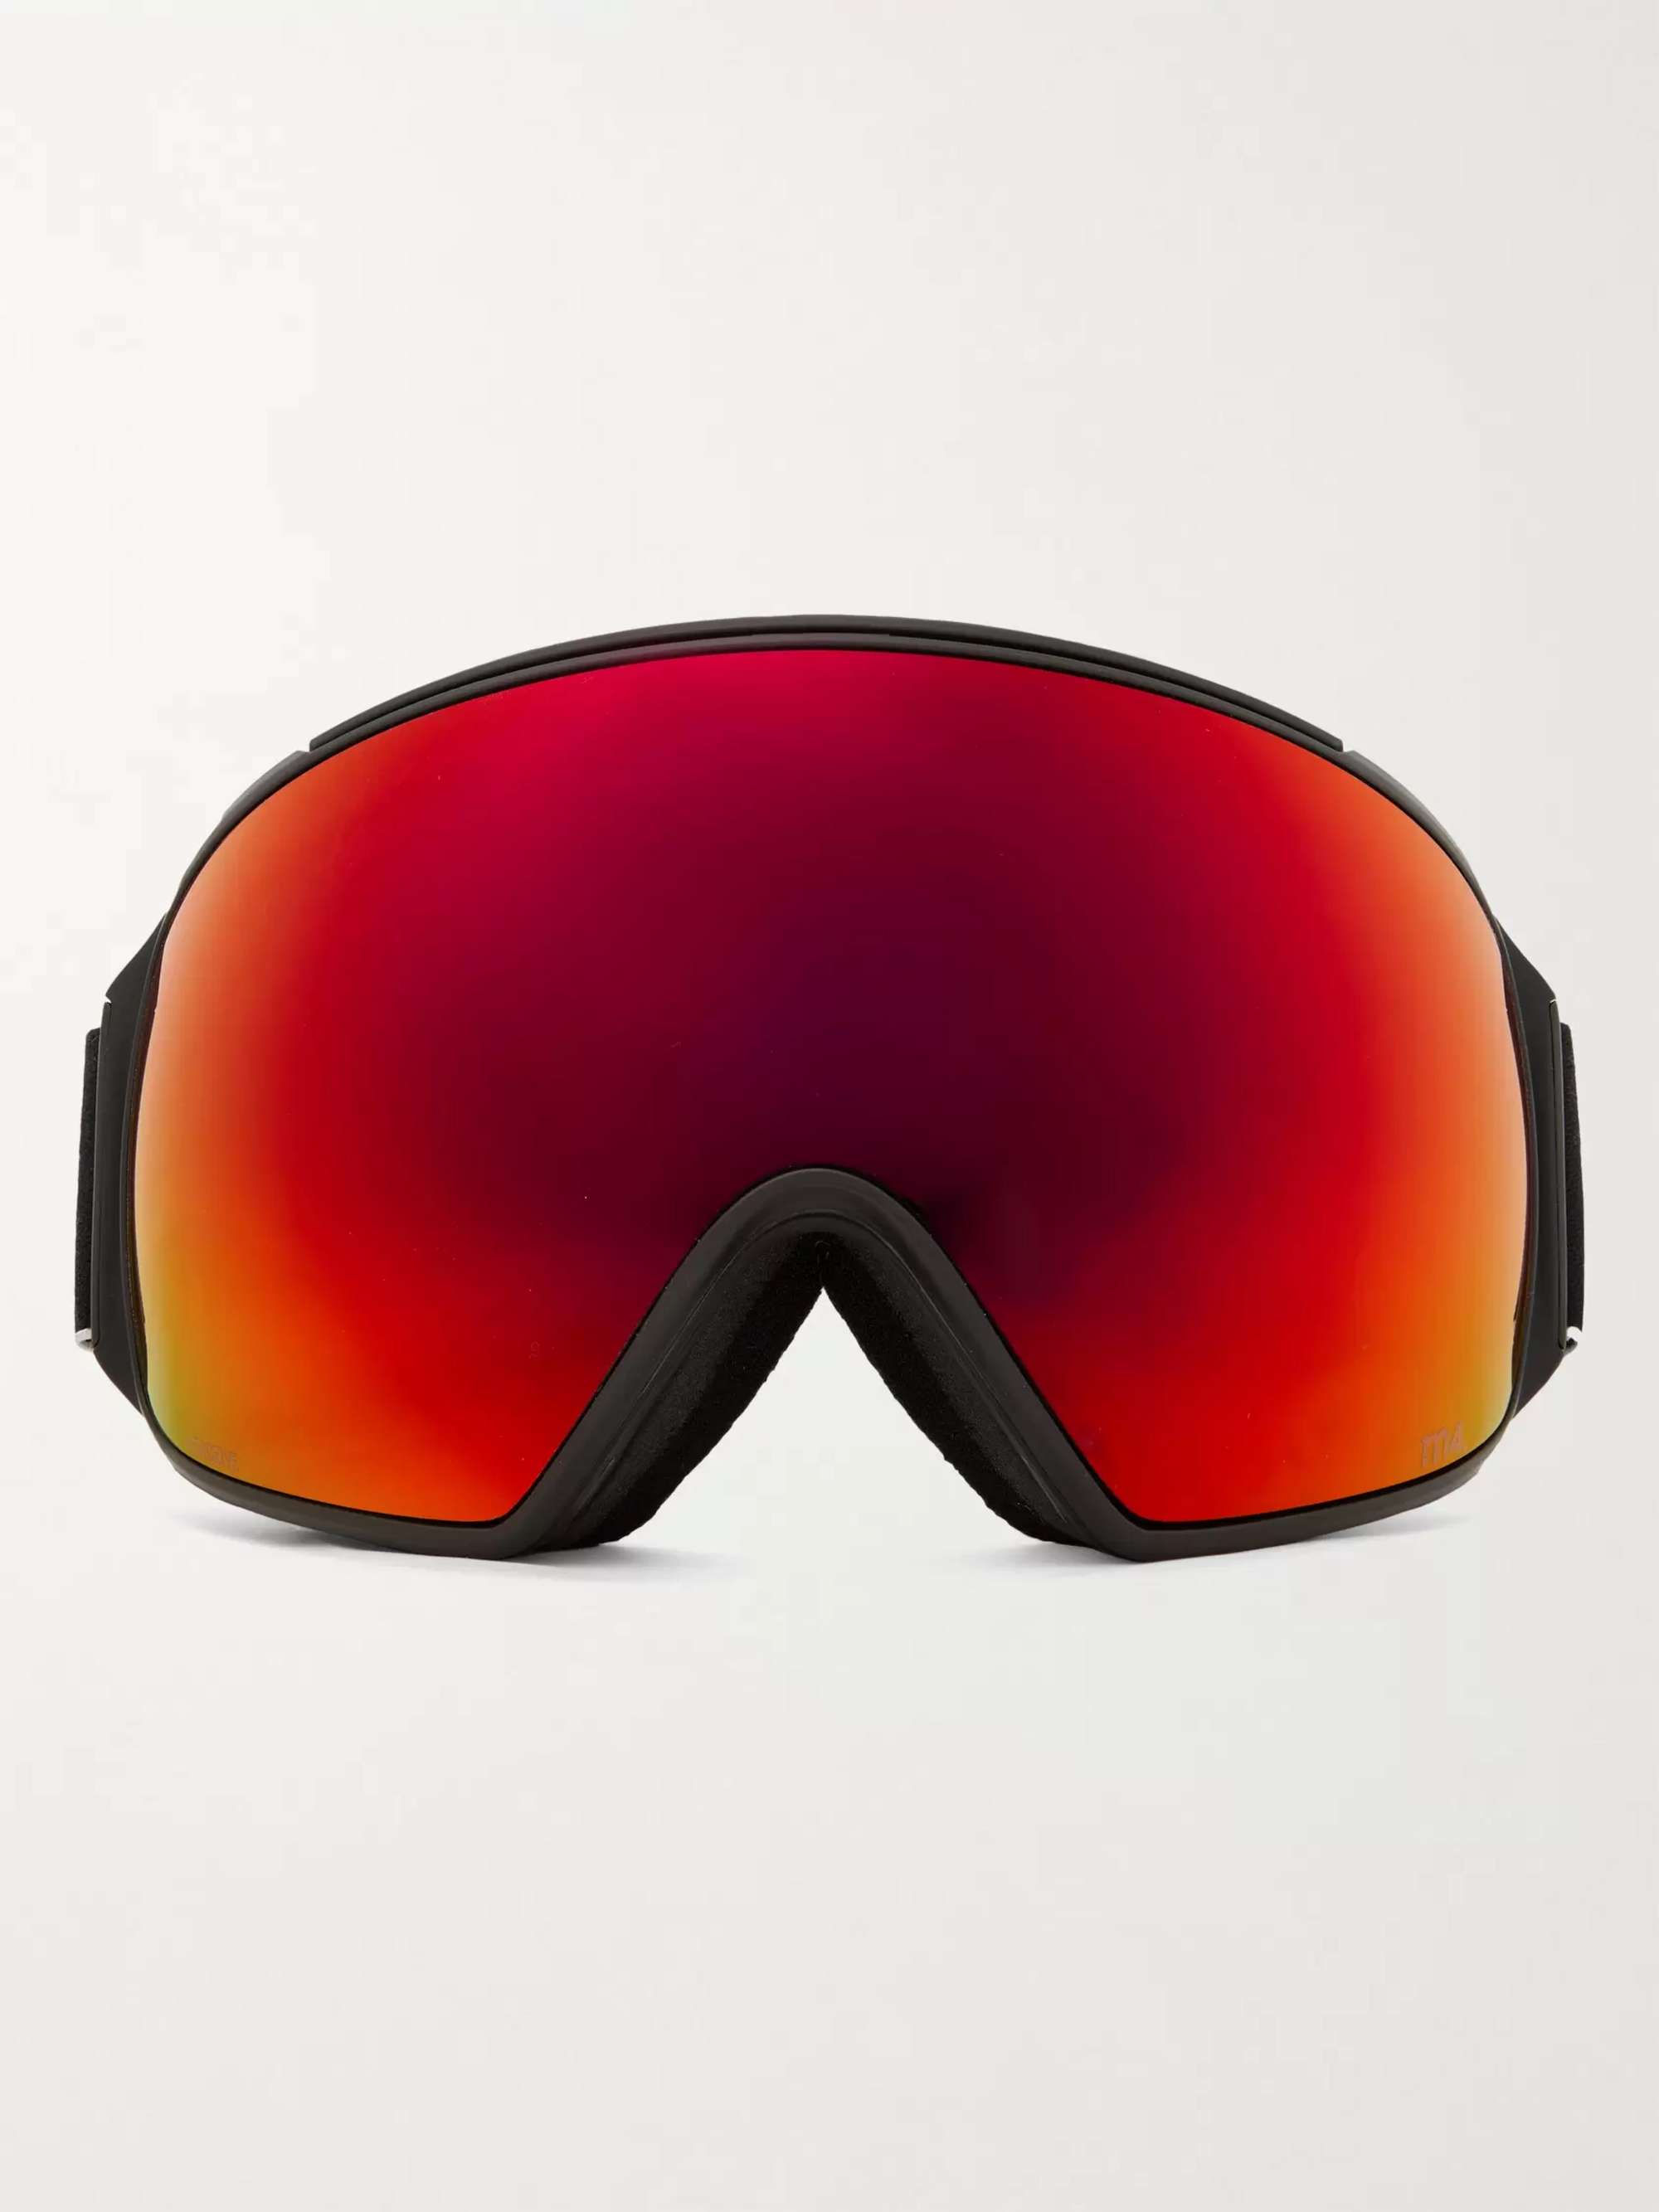 ANON M4 Ski Goggles and Stretch-Jersey Face Mask | MR PORTER